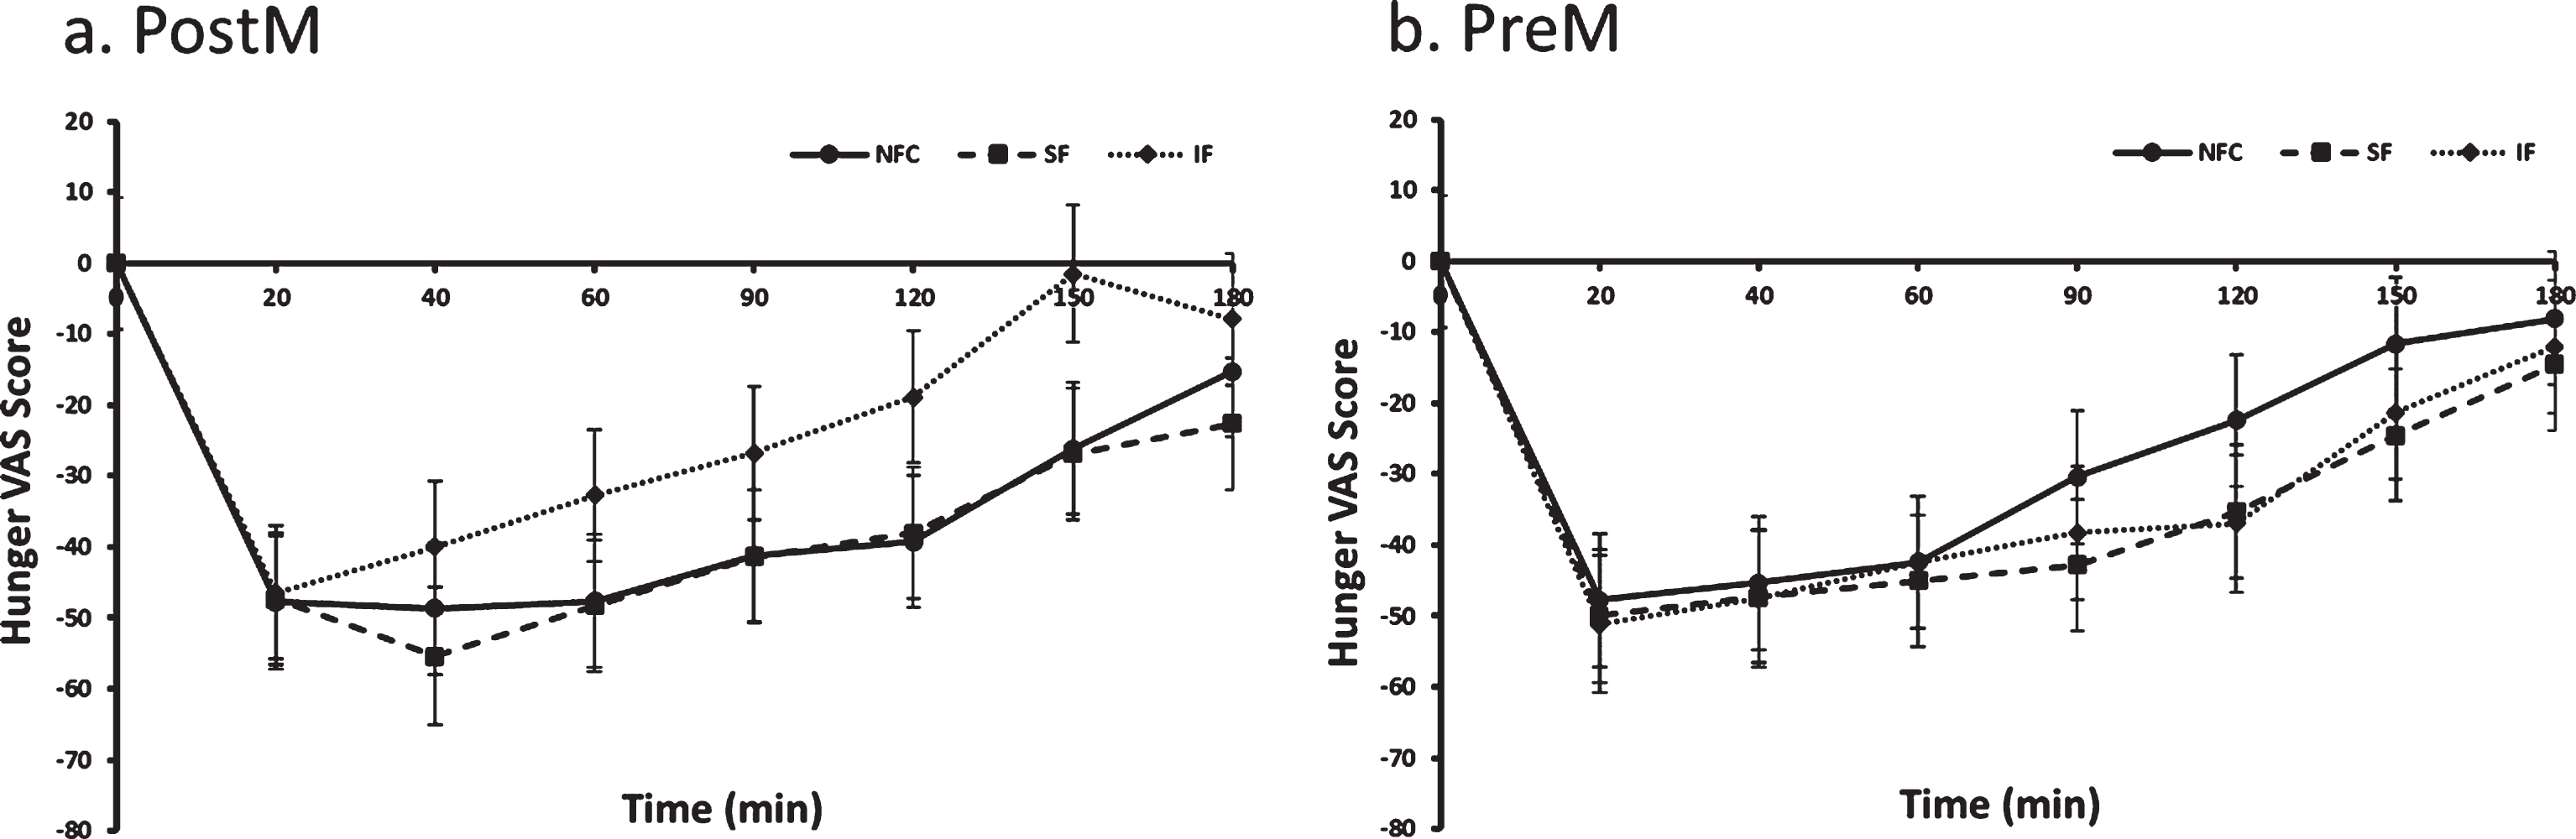 Hunger variation in Postmenopausal (PostM, n = 10) and Premenopausal (PreM, n = 9) women after NFC-No Fiber Control, IF-Insoluble Fiber, SF-Soluble Fiber meals. Values are the means±SEM at each time point. Different letters at the same time point denotes significant difference, p < 0.05.